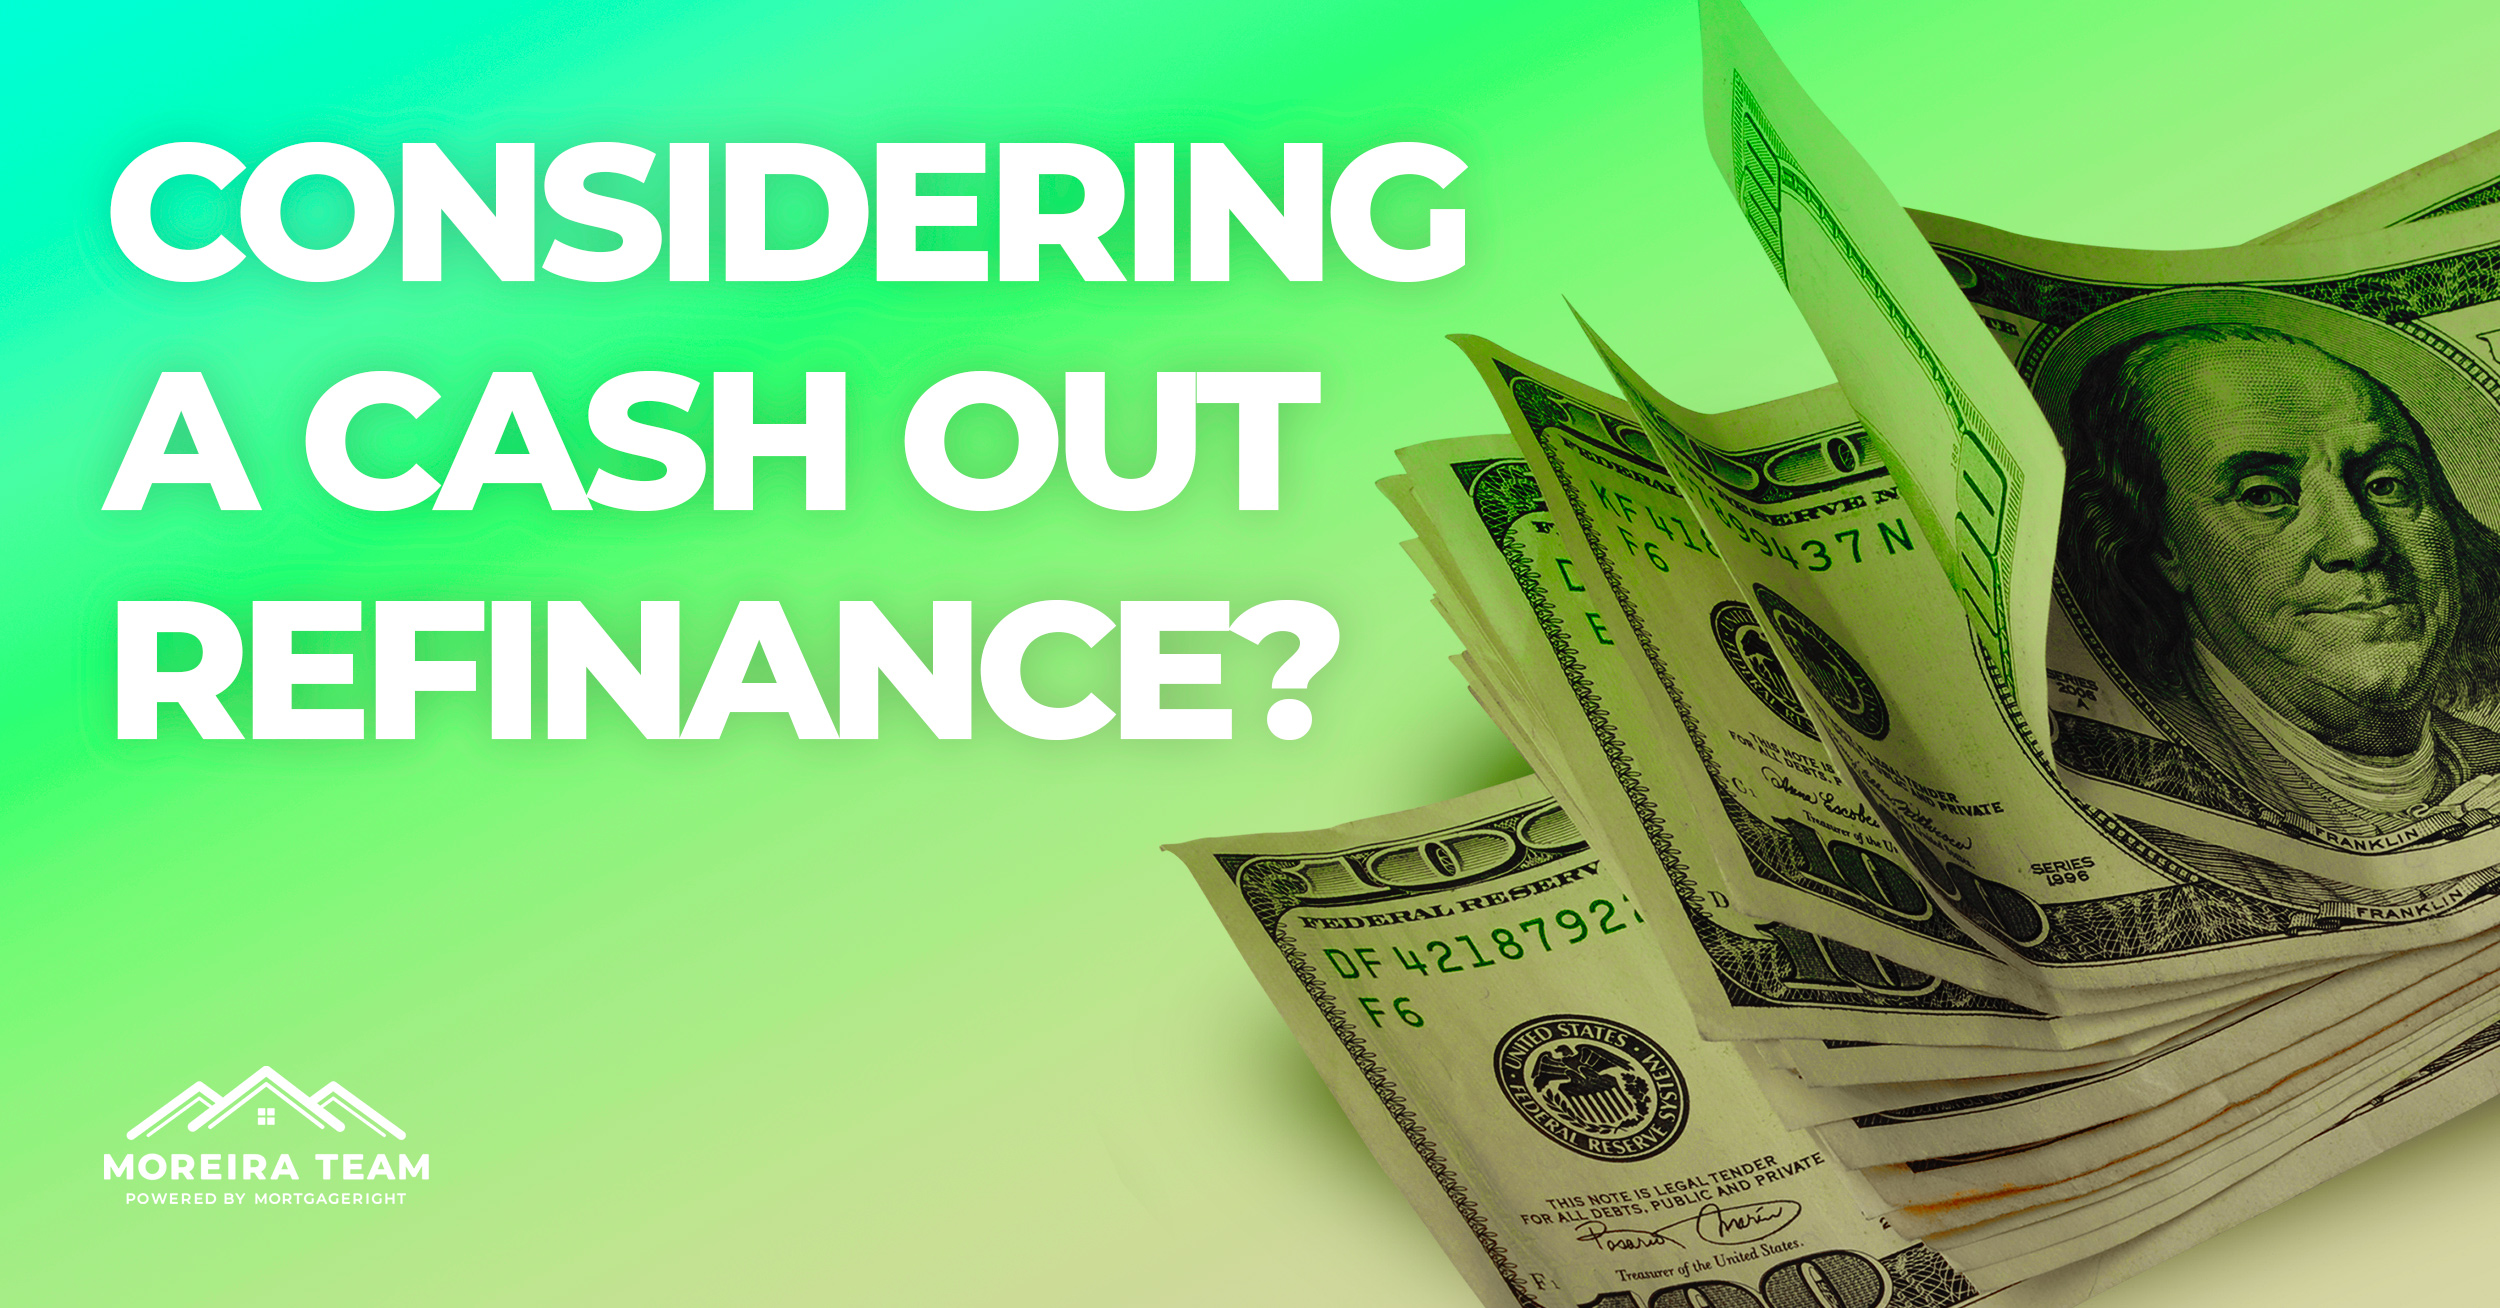 Have You Considered a Cash Out Refinance?